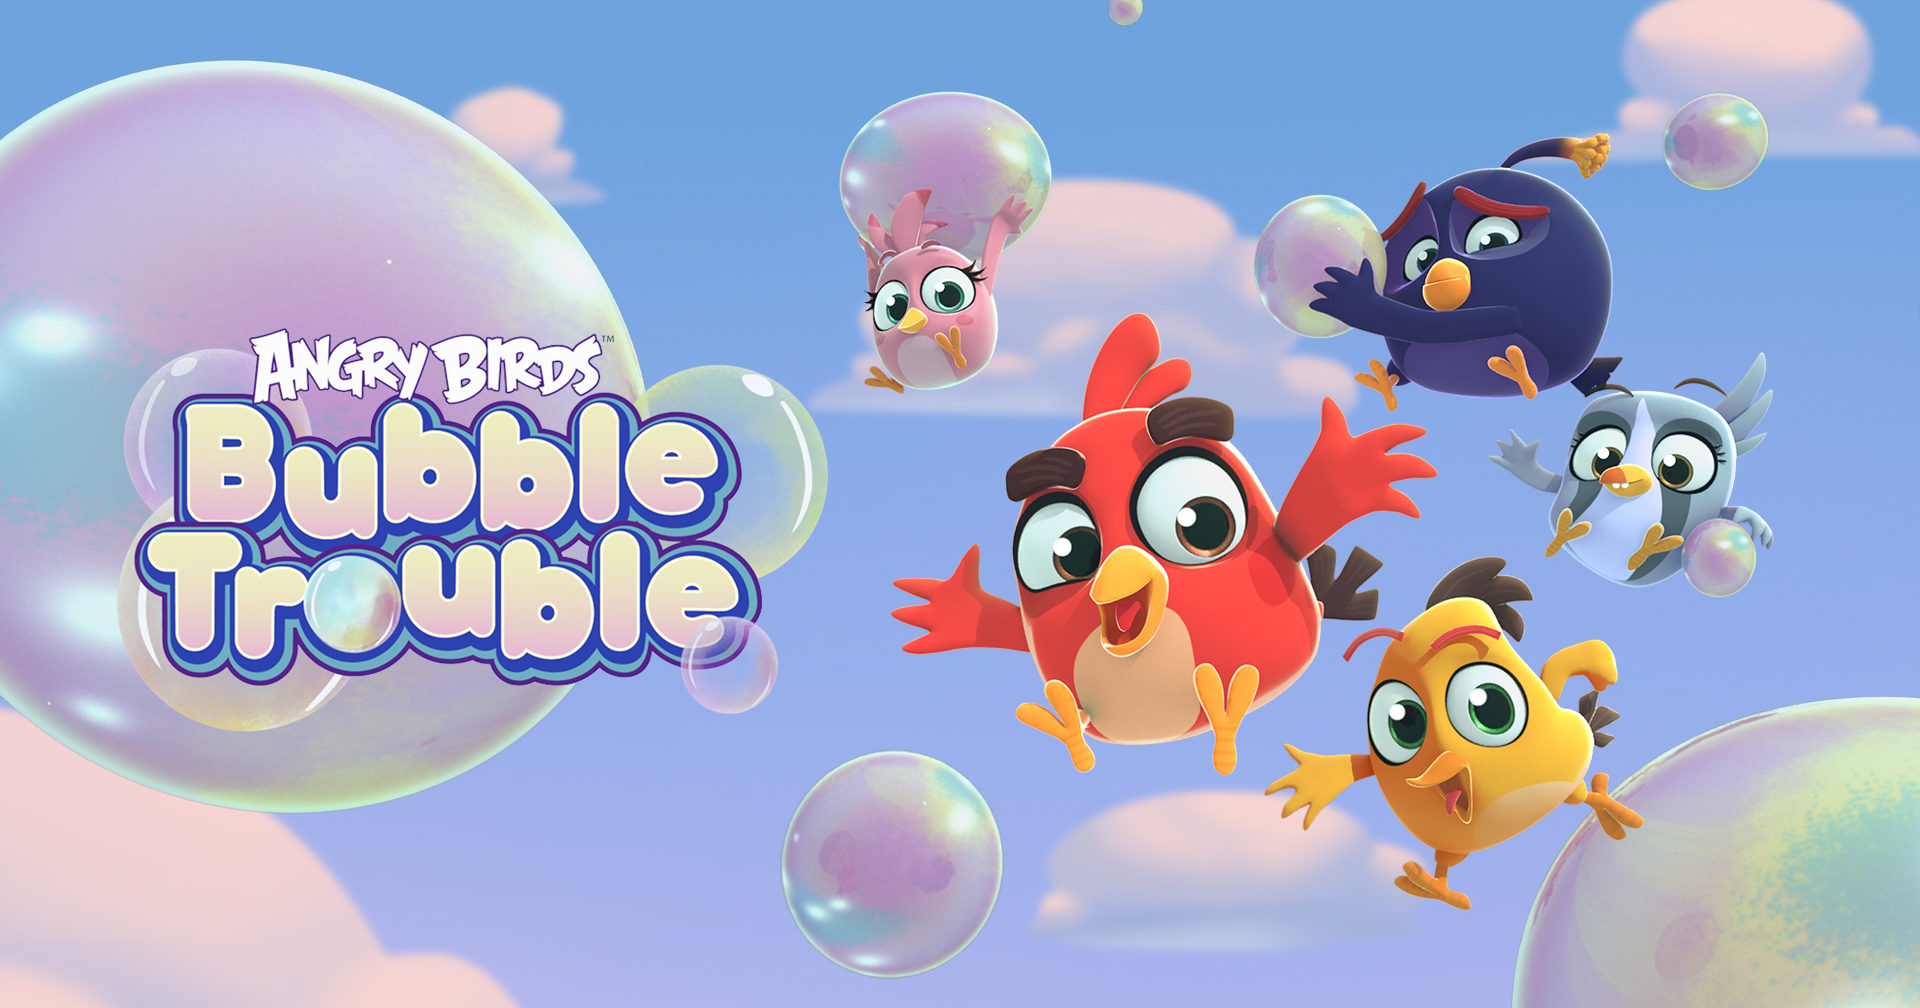 Angry Birds Bubble Trouble pops onto Amazon FreeTime Unlimited!